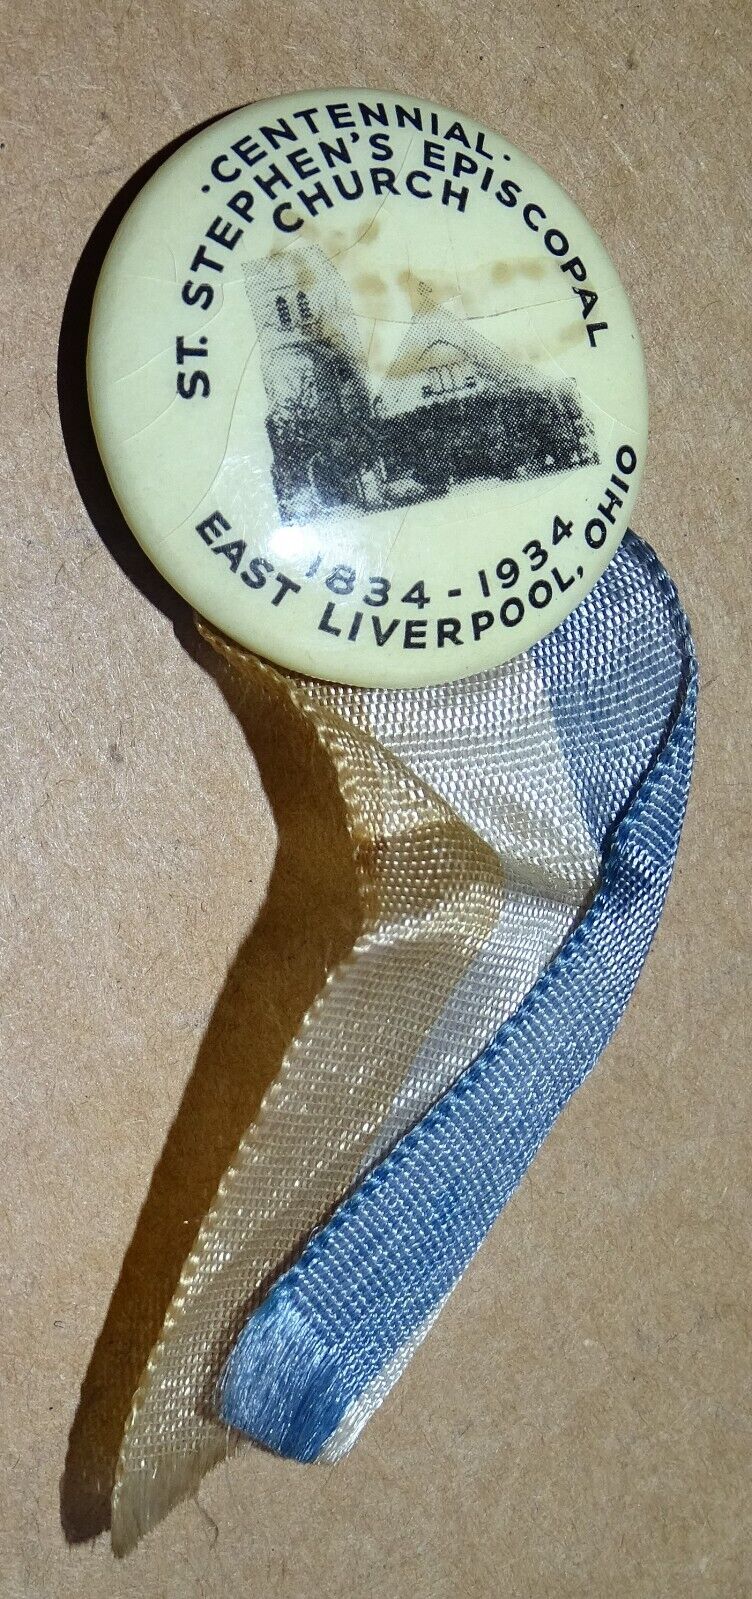 St Stephen\'s Episcopal Church East Liverpool Ohio 1834-1934 Button with Ribbon